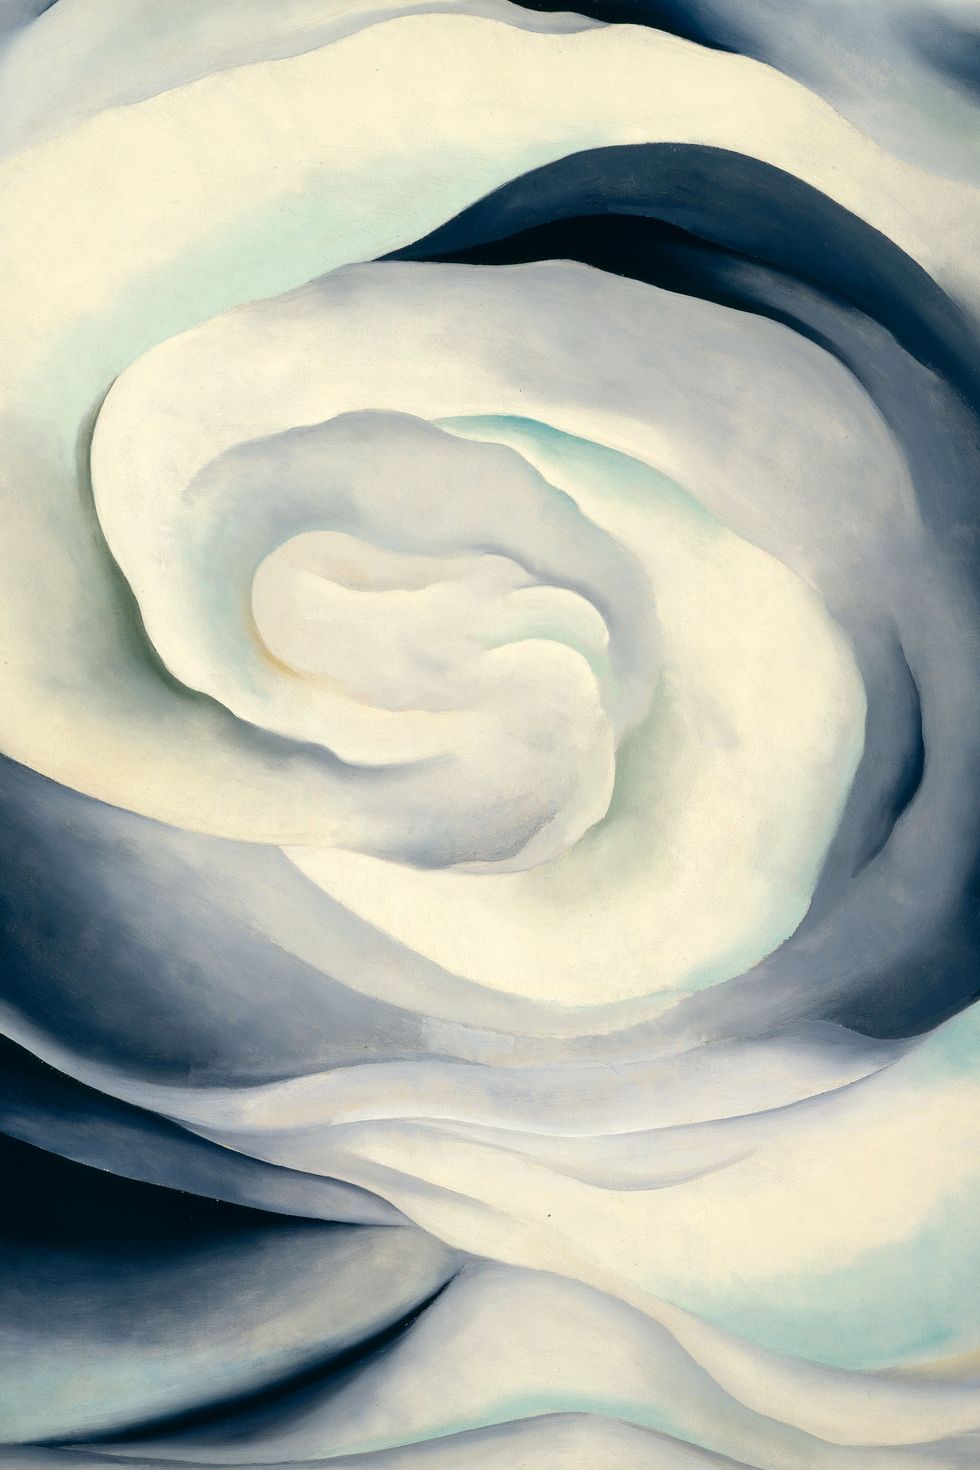 Georgia O'Keeffe, Abstraction White Rose